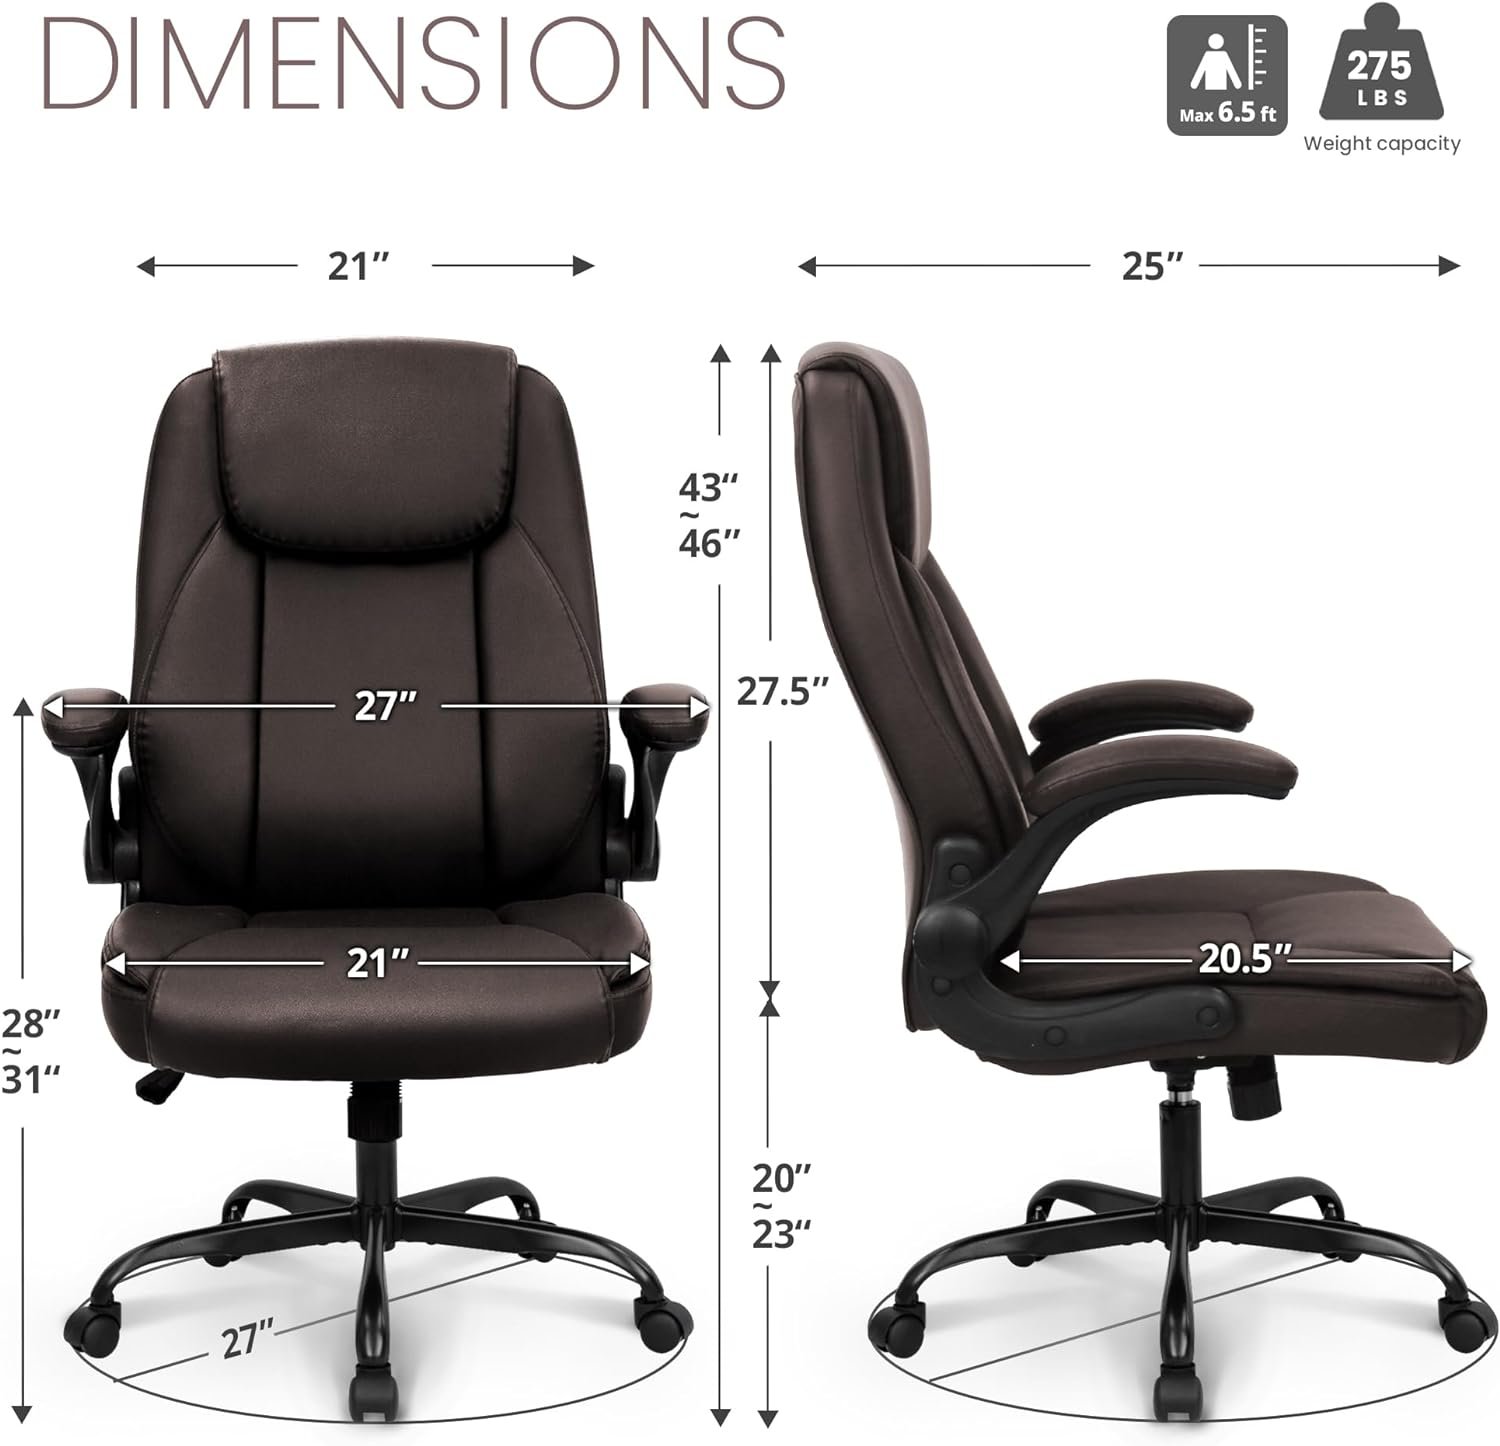 NEO CHAIR White Office Chair Review